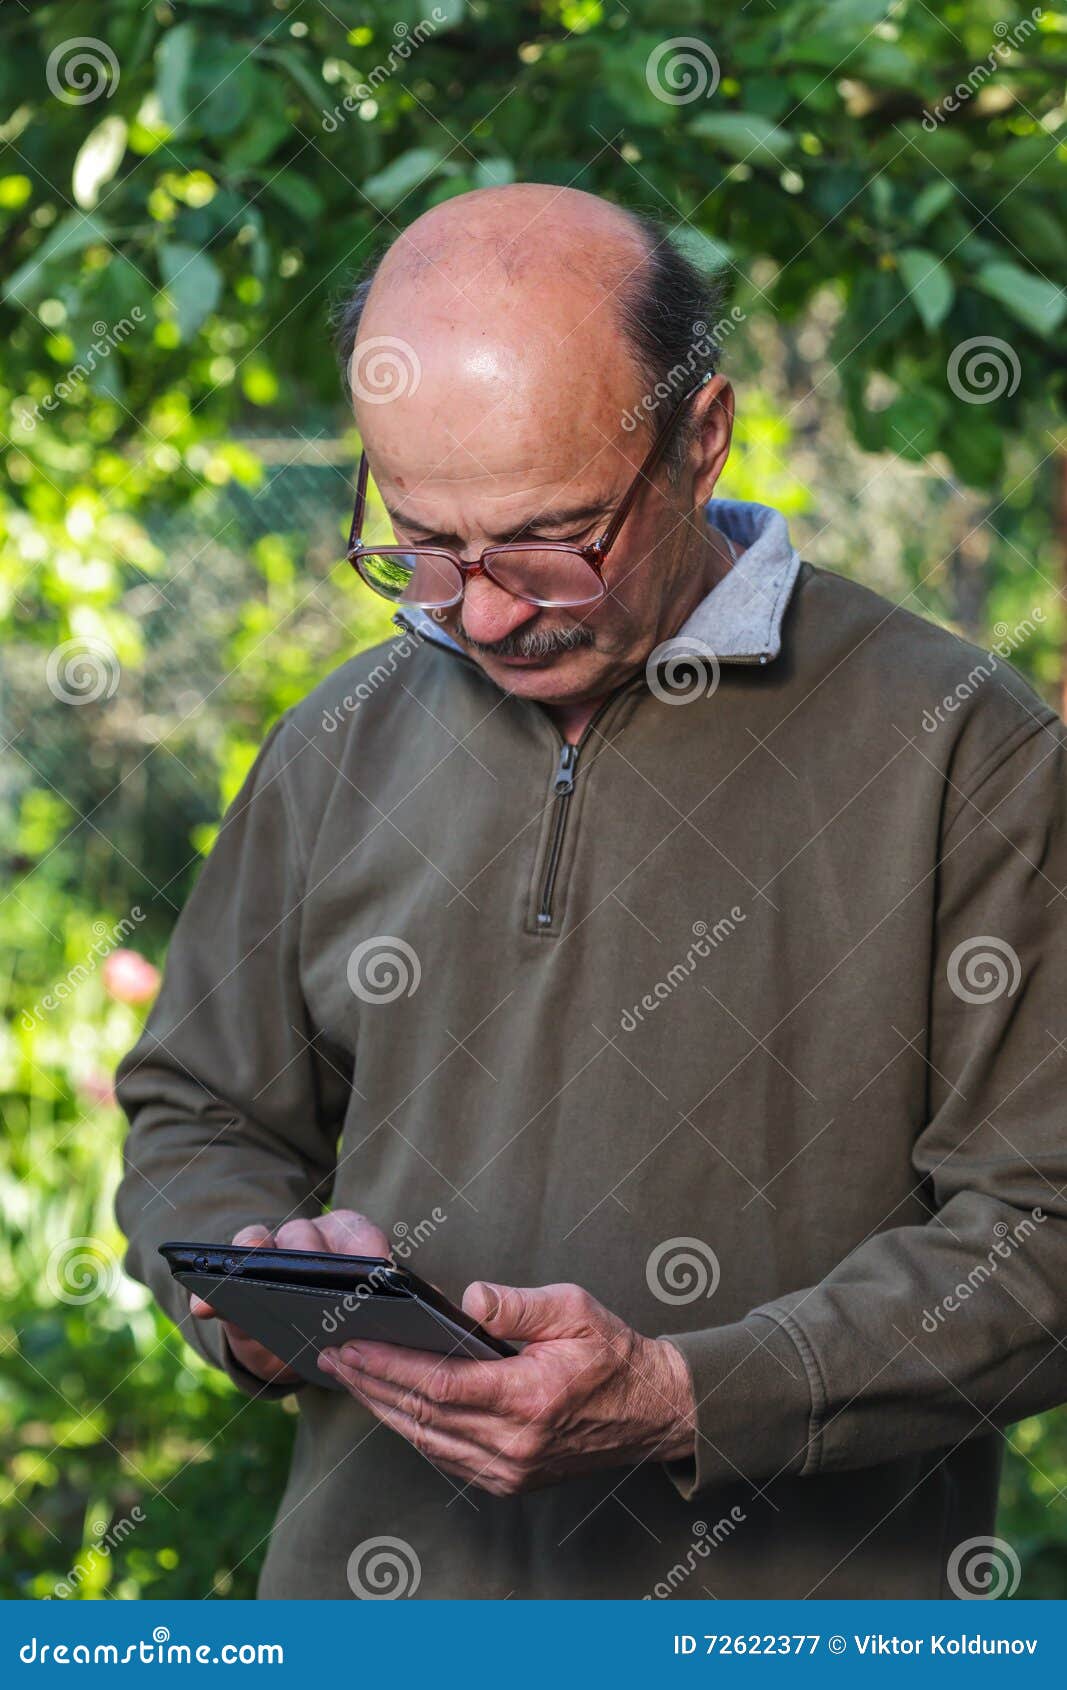 Elderly Man With A Bald Head Mustache And Glasses Learn To Deal With Tablet Stock Image